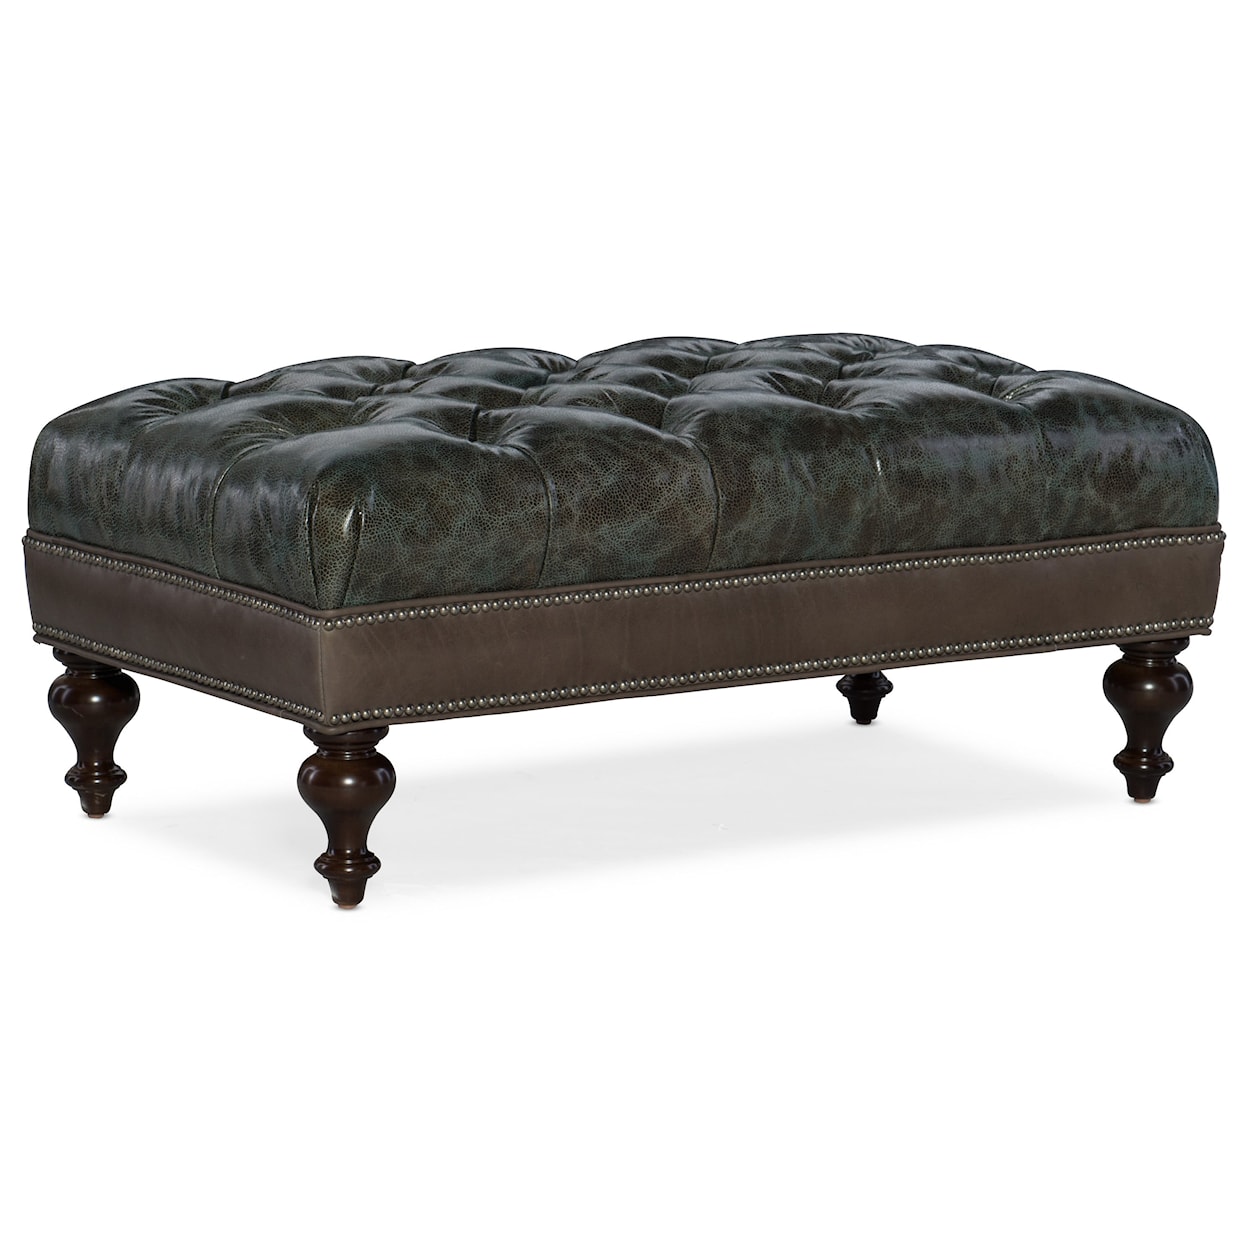 Bradington Young Rects Tufted Rectangle Ottoman